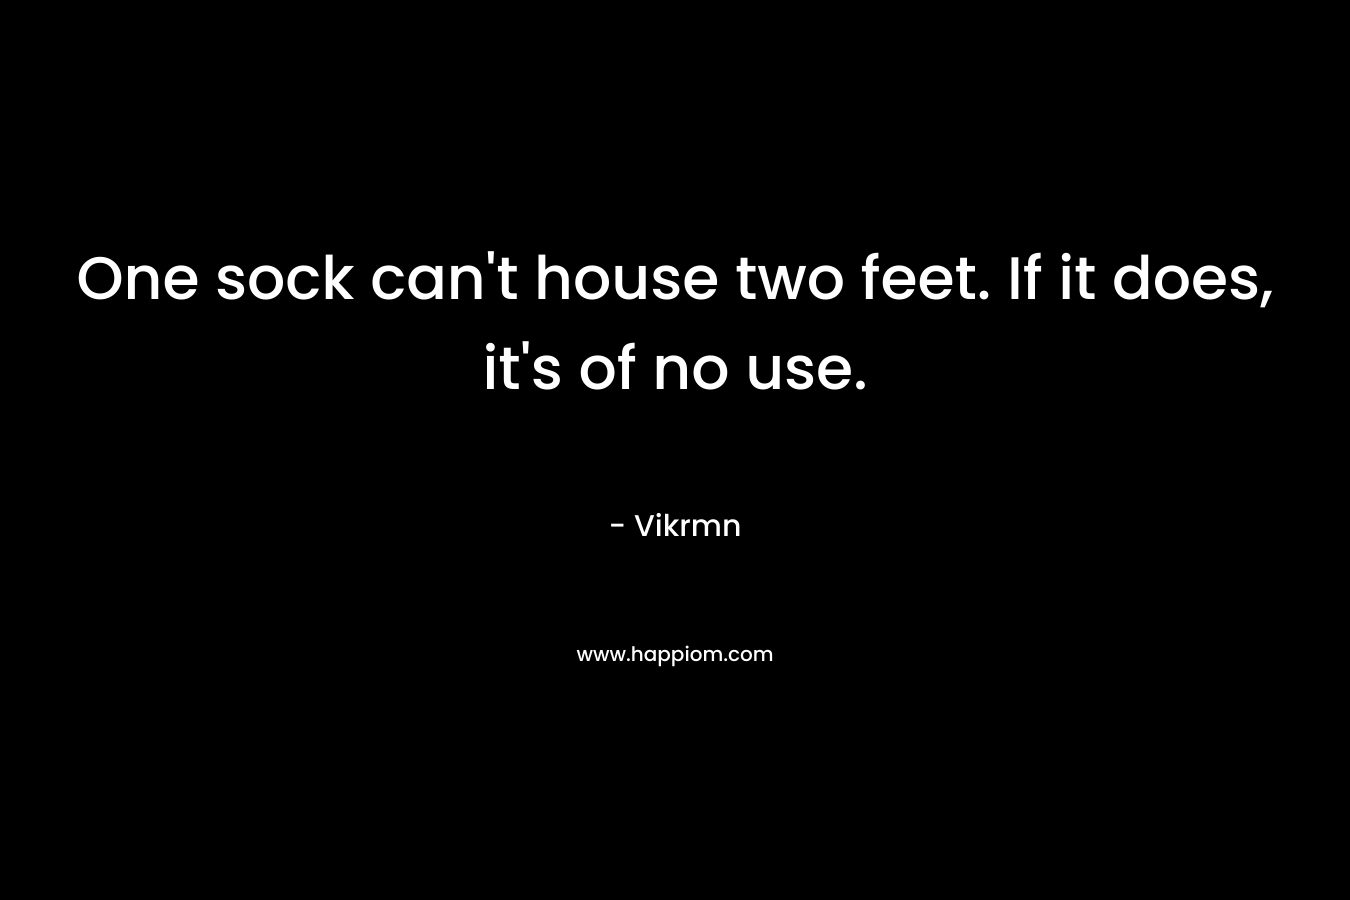 One sock can’t house two feet. If it does, it’s of no use. – Vikrmn